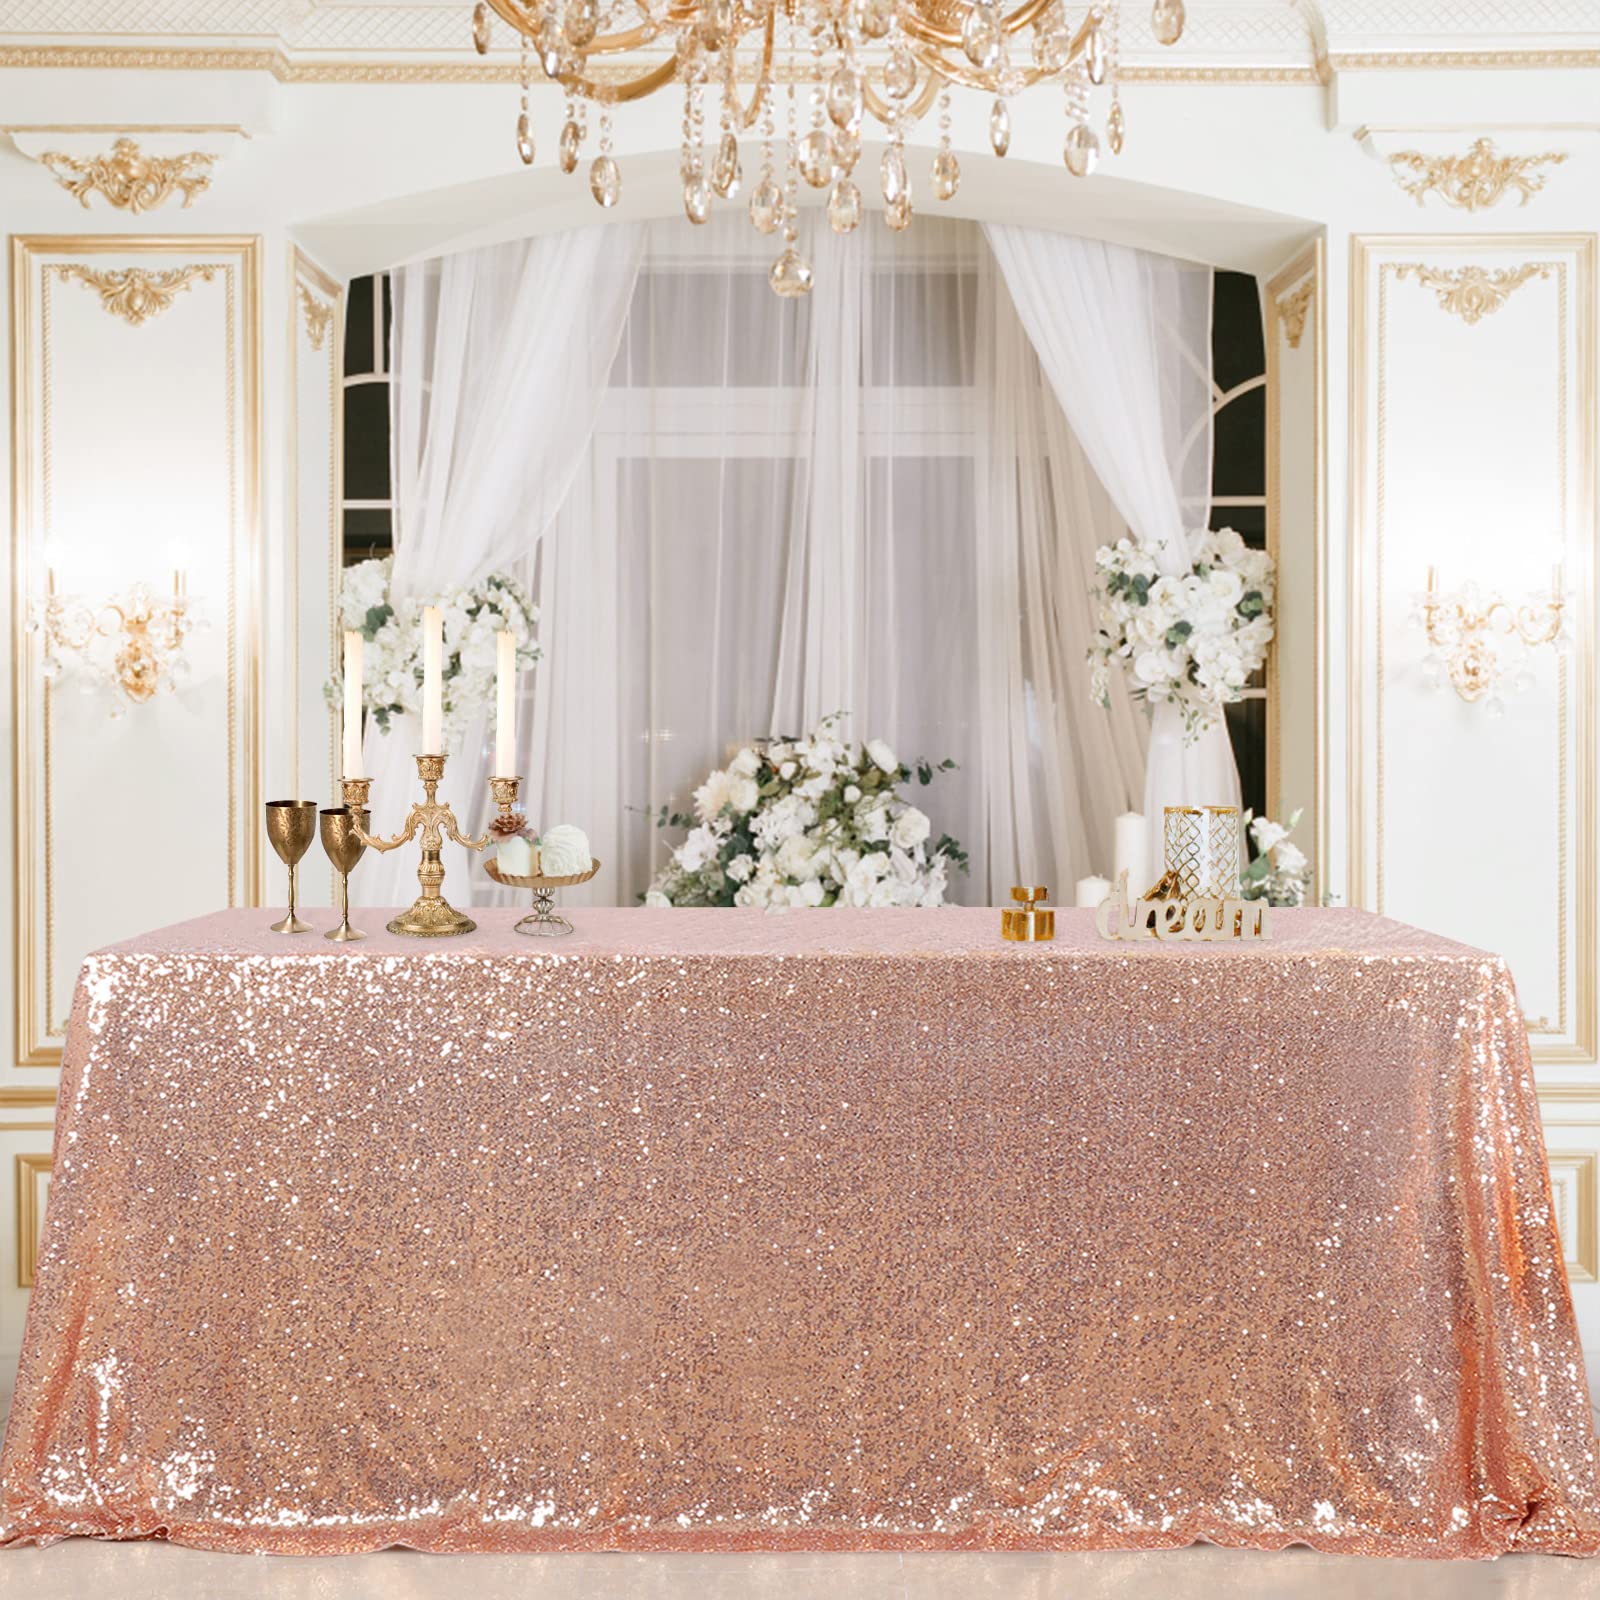 B-cOOL Rose gold Sequin Tablecloth Party Tablecloths Baby Shower Tablecloth 60x102inch Rectangle Table cloth for Sparkly Wedding